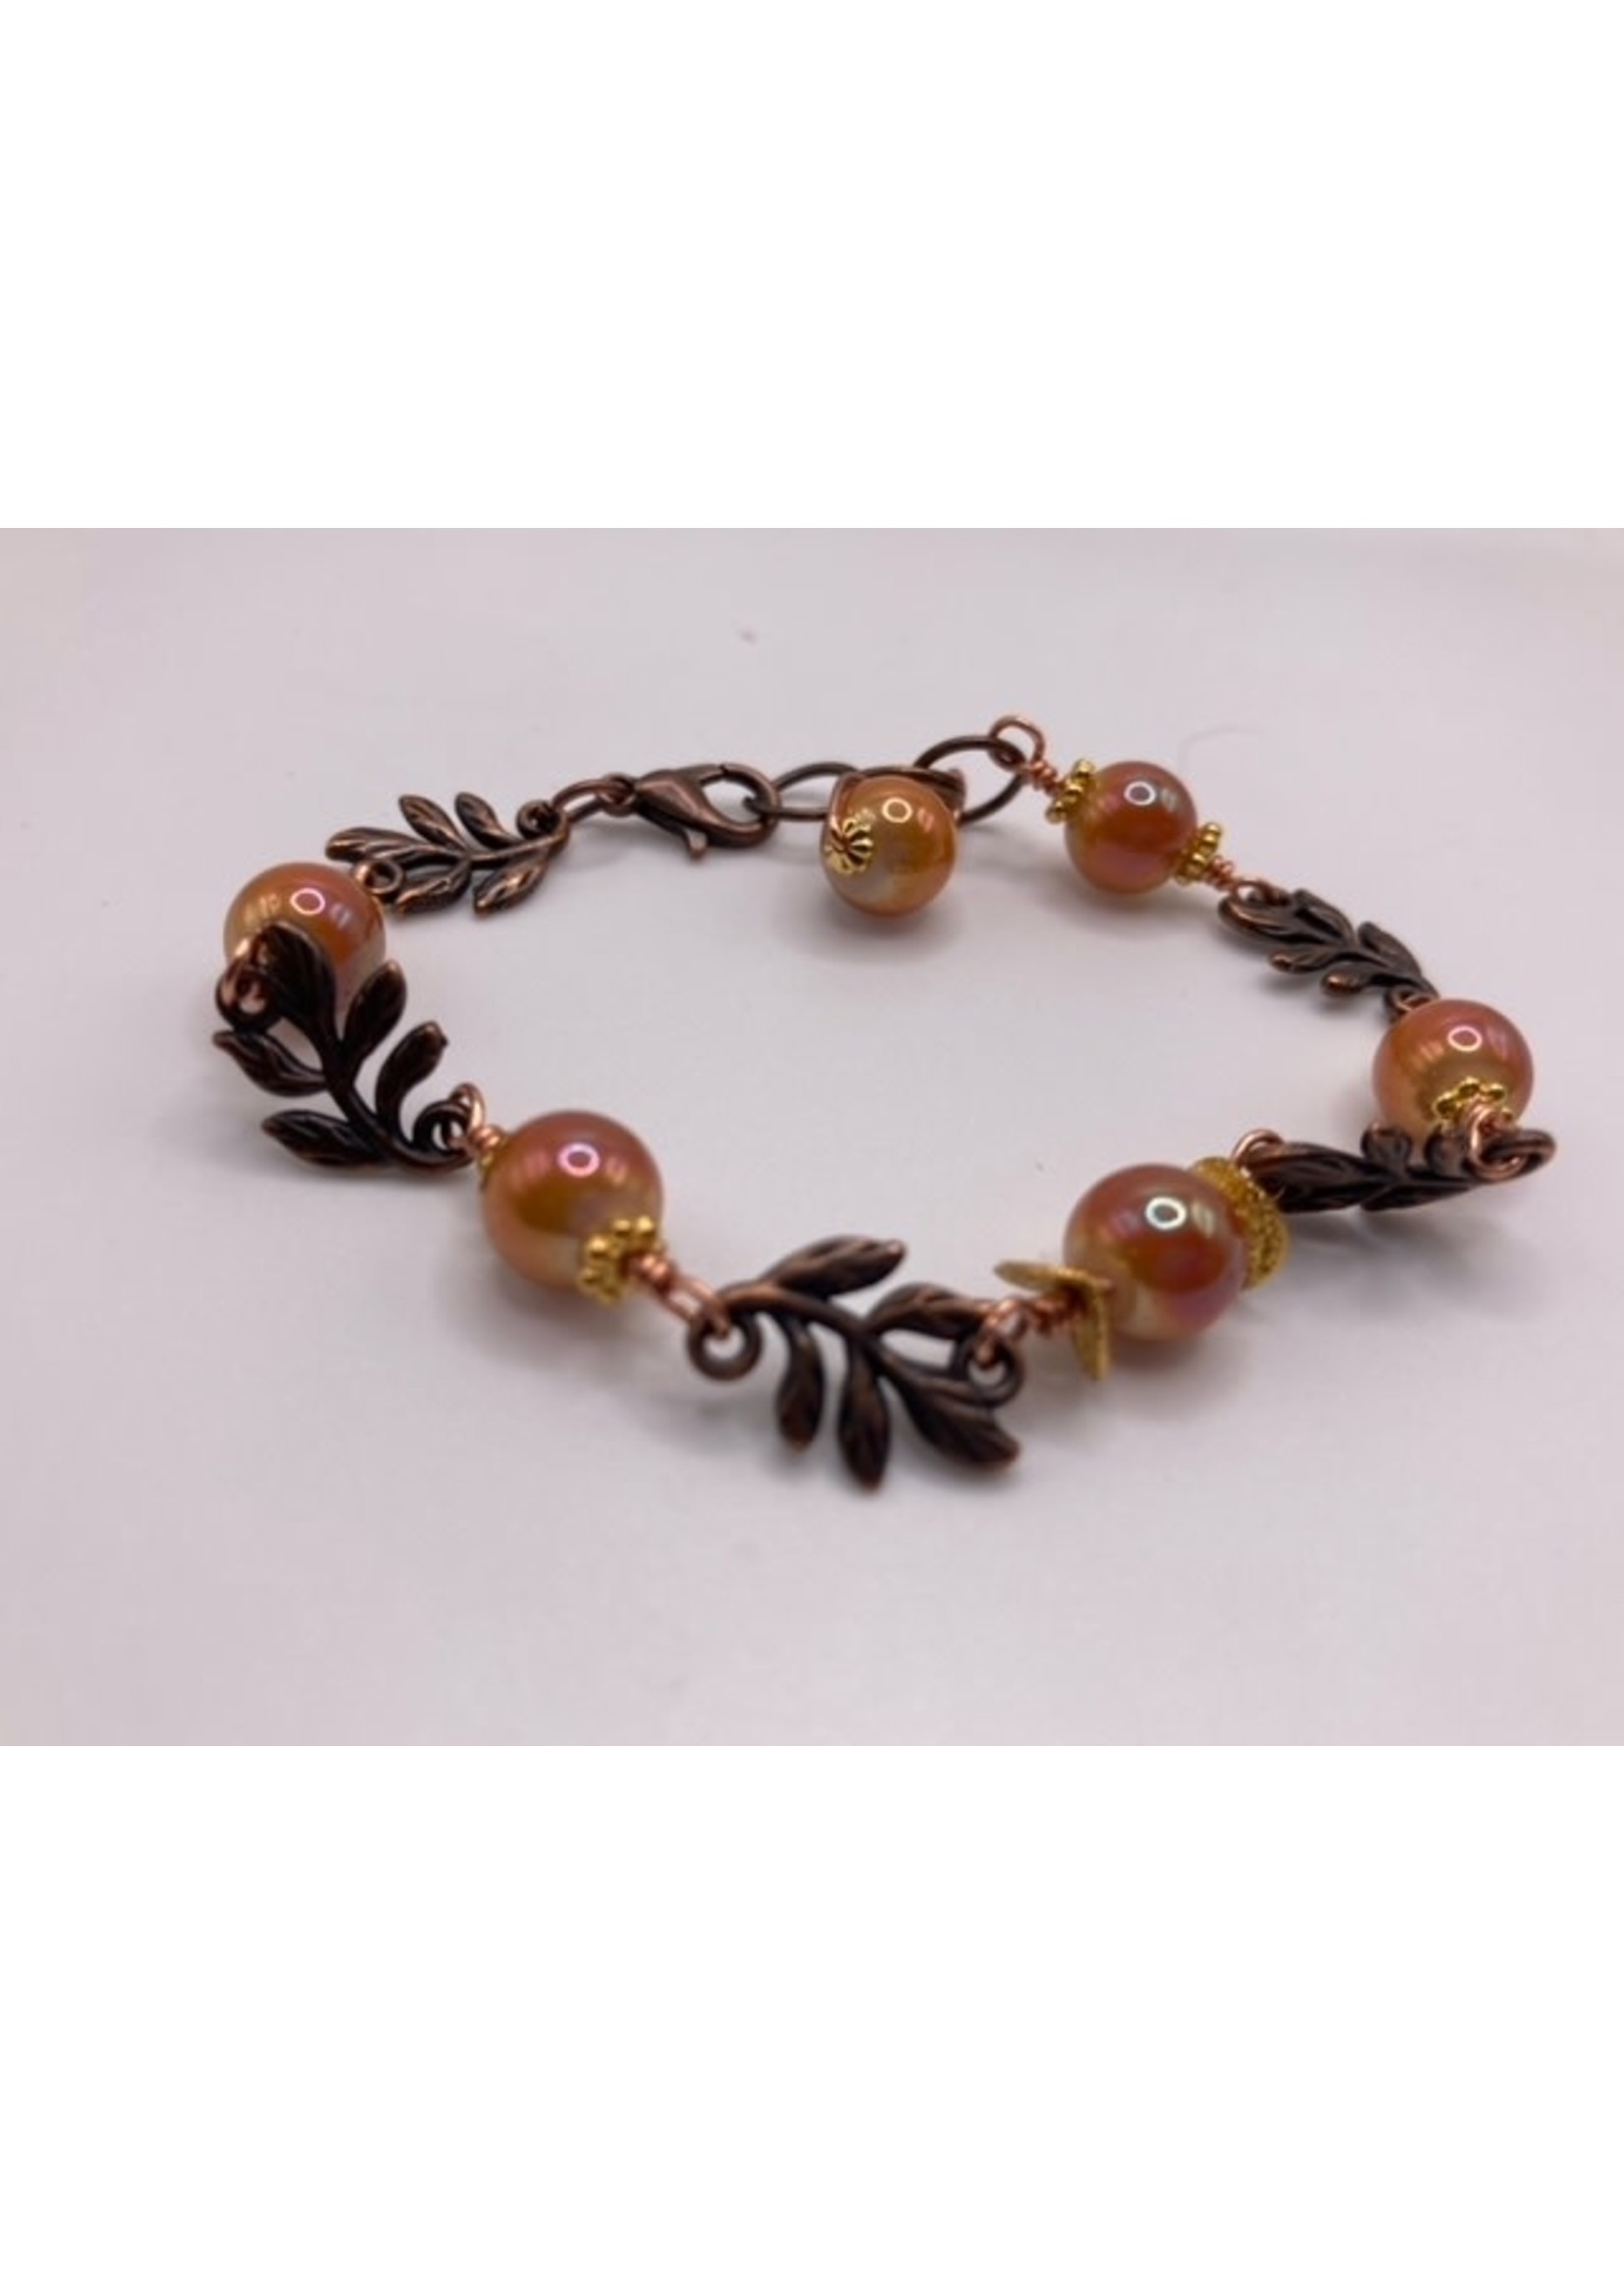 Bronze Leaf Bracelet with Gold spacer Beads and Orange Pearl Sheen